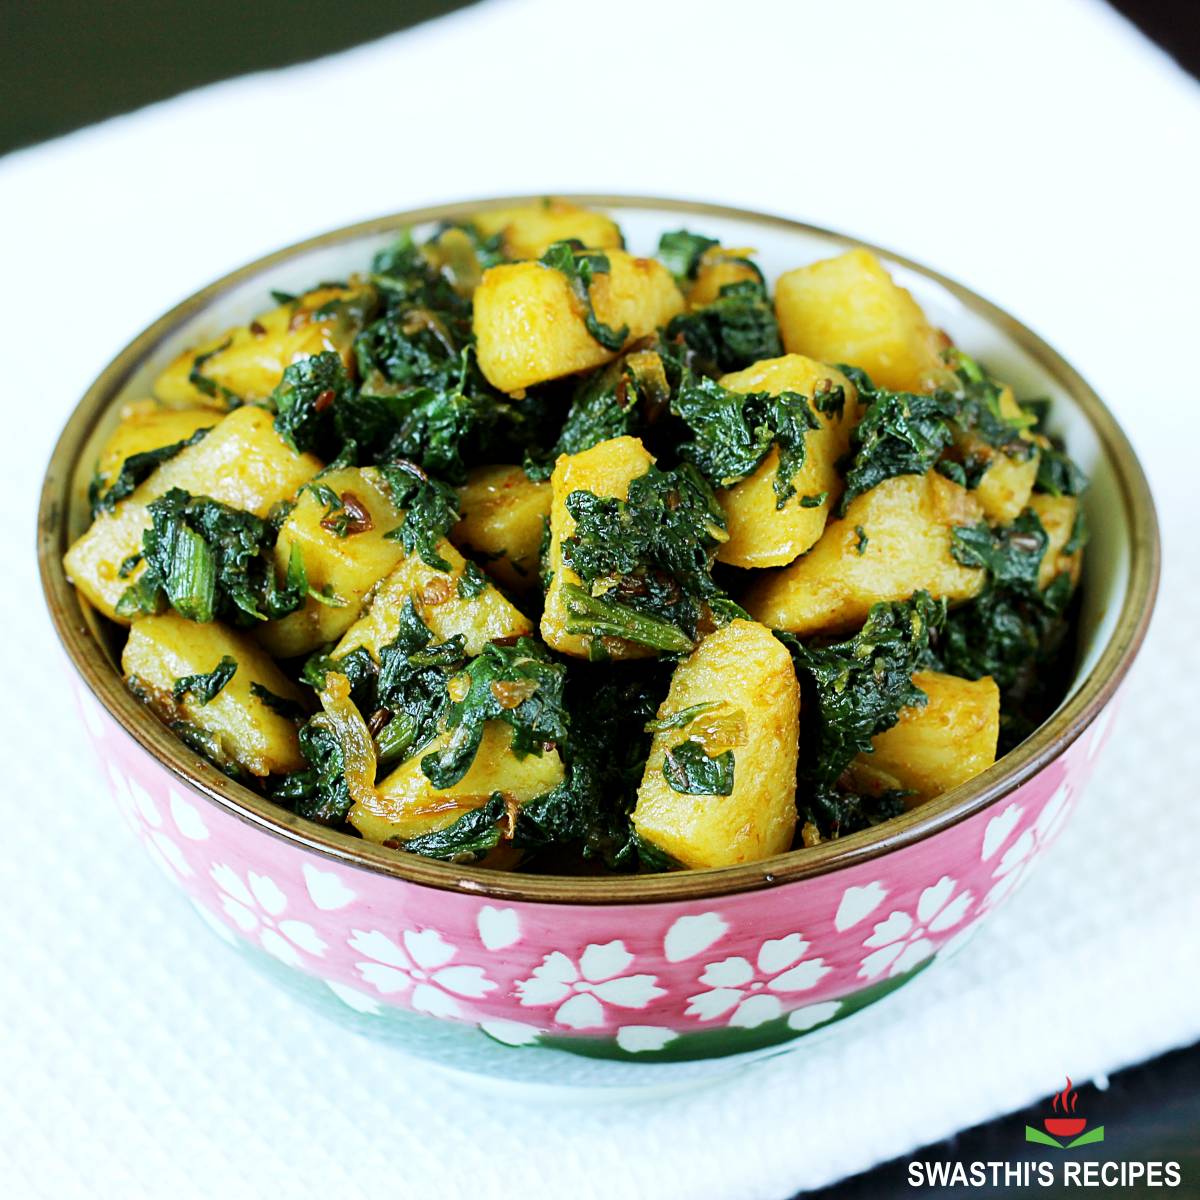 Aloo palak is spinach potatoes made in Indian style